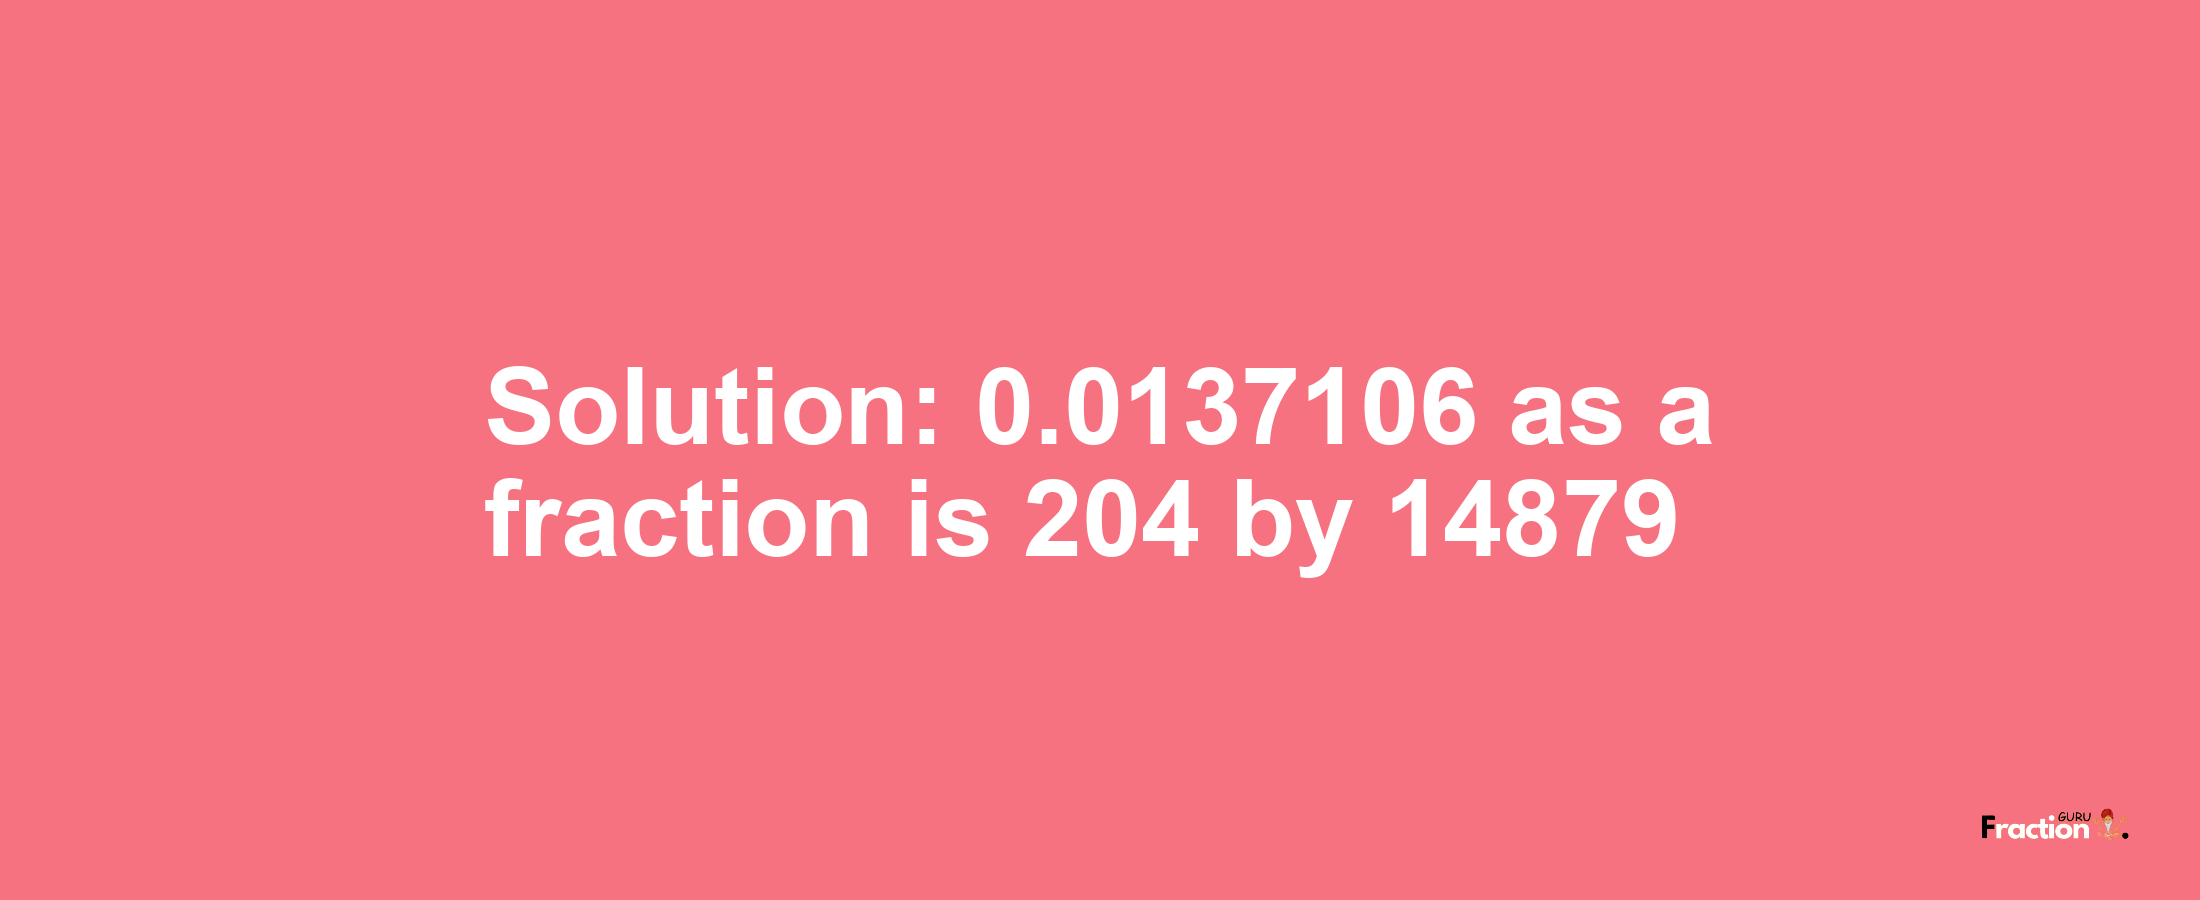 Solution:0.0137106 as a fraction is 204/14879